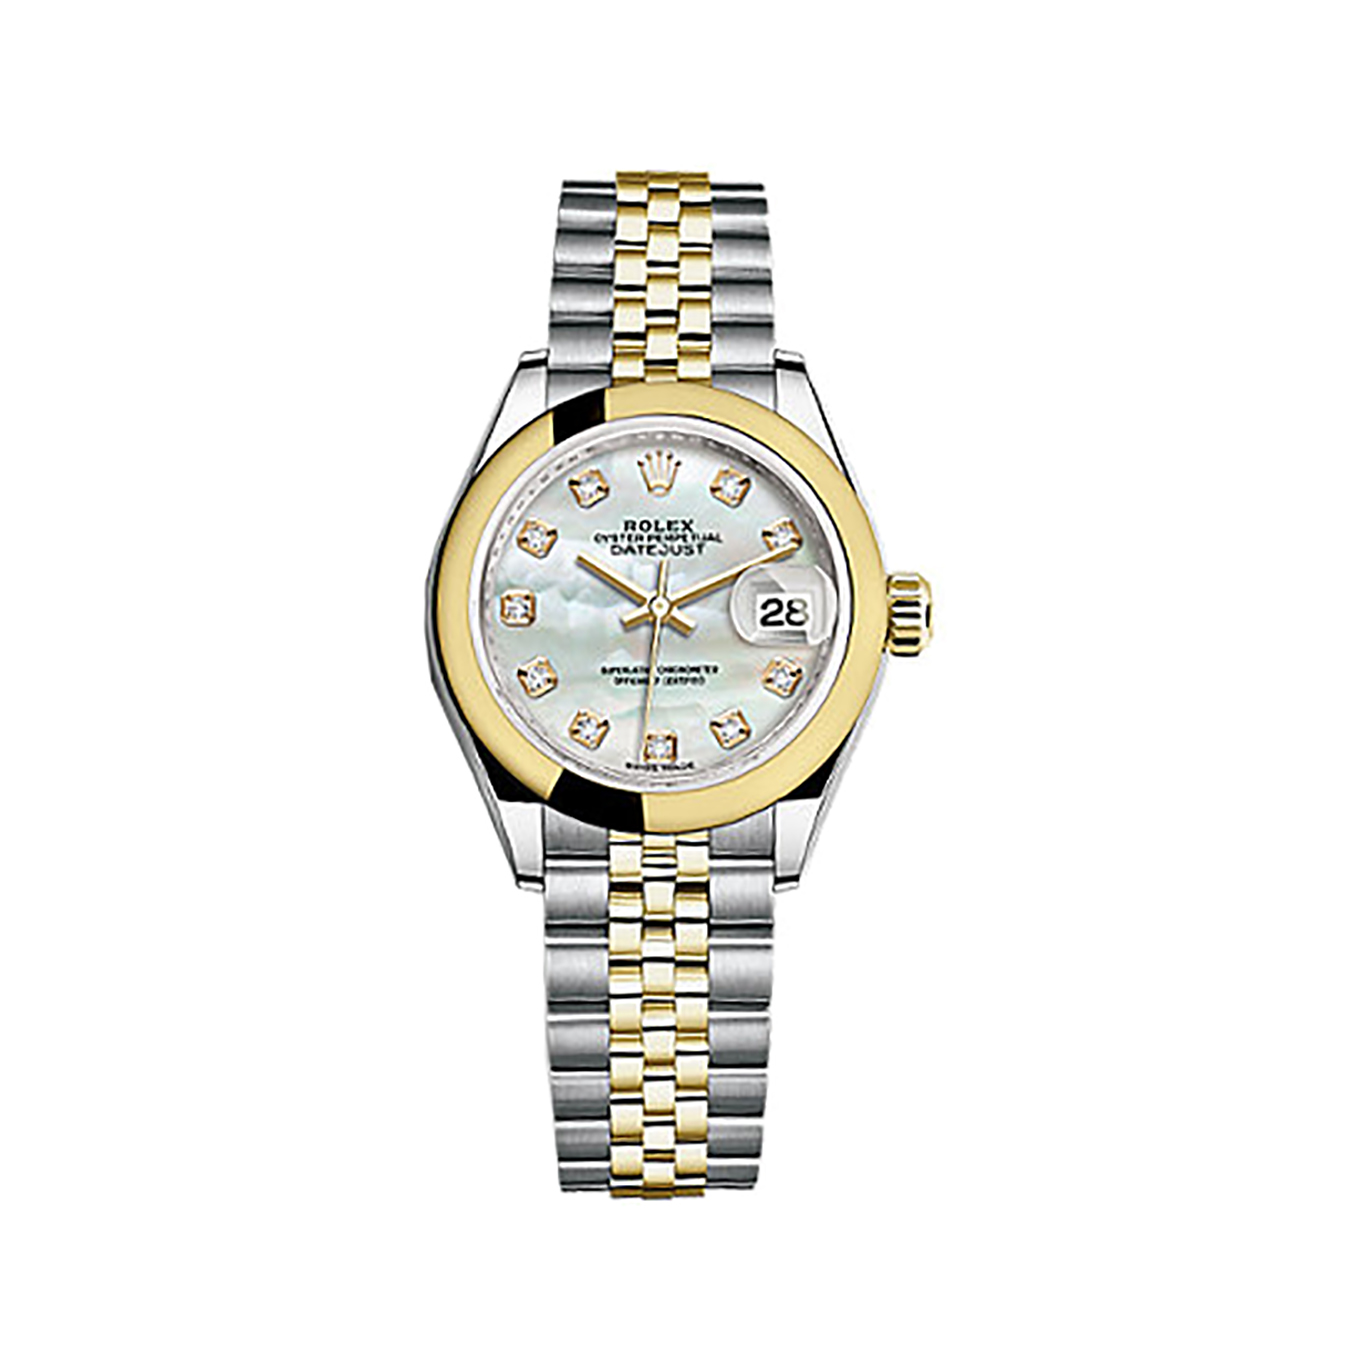 Lady-Datejust 28 279163 Gold & Stainless Steel Watch (White Mother-of-pearl Set with Diamonds)